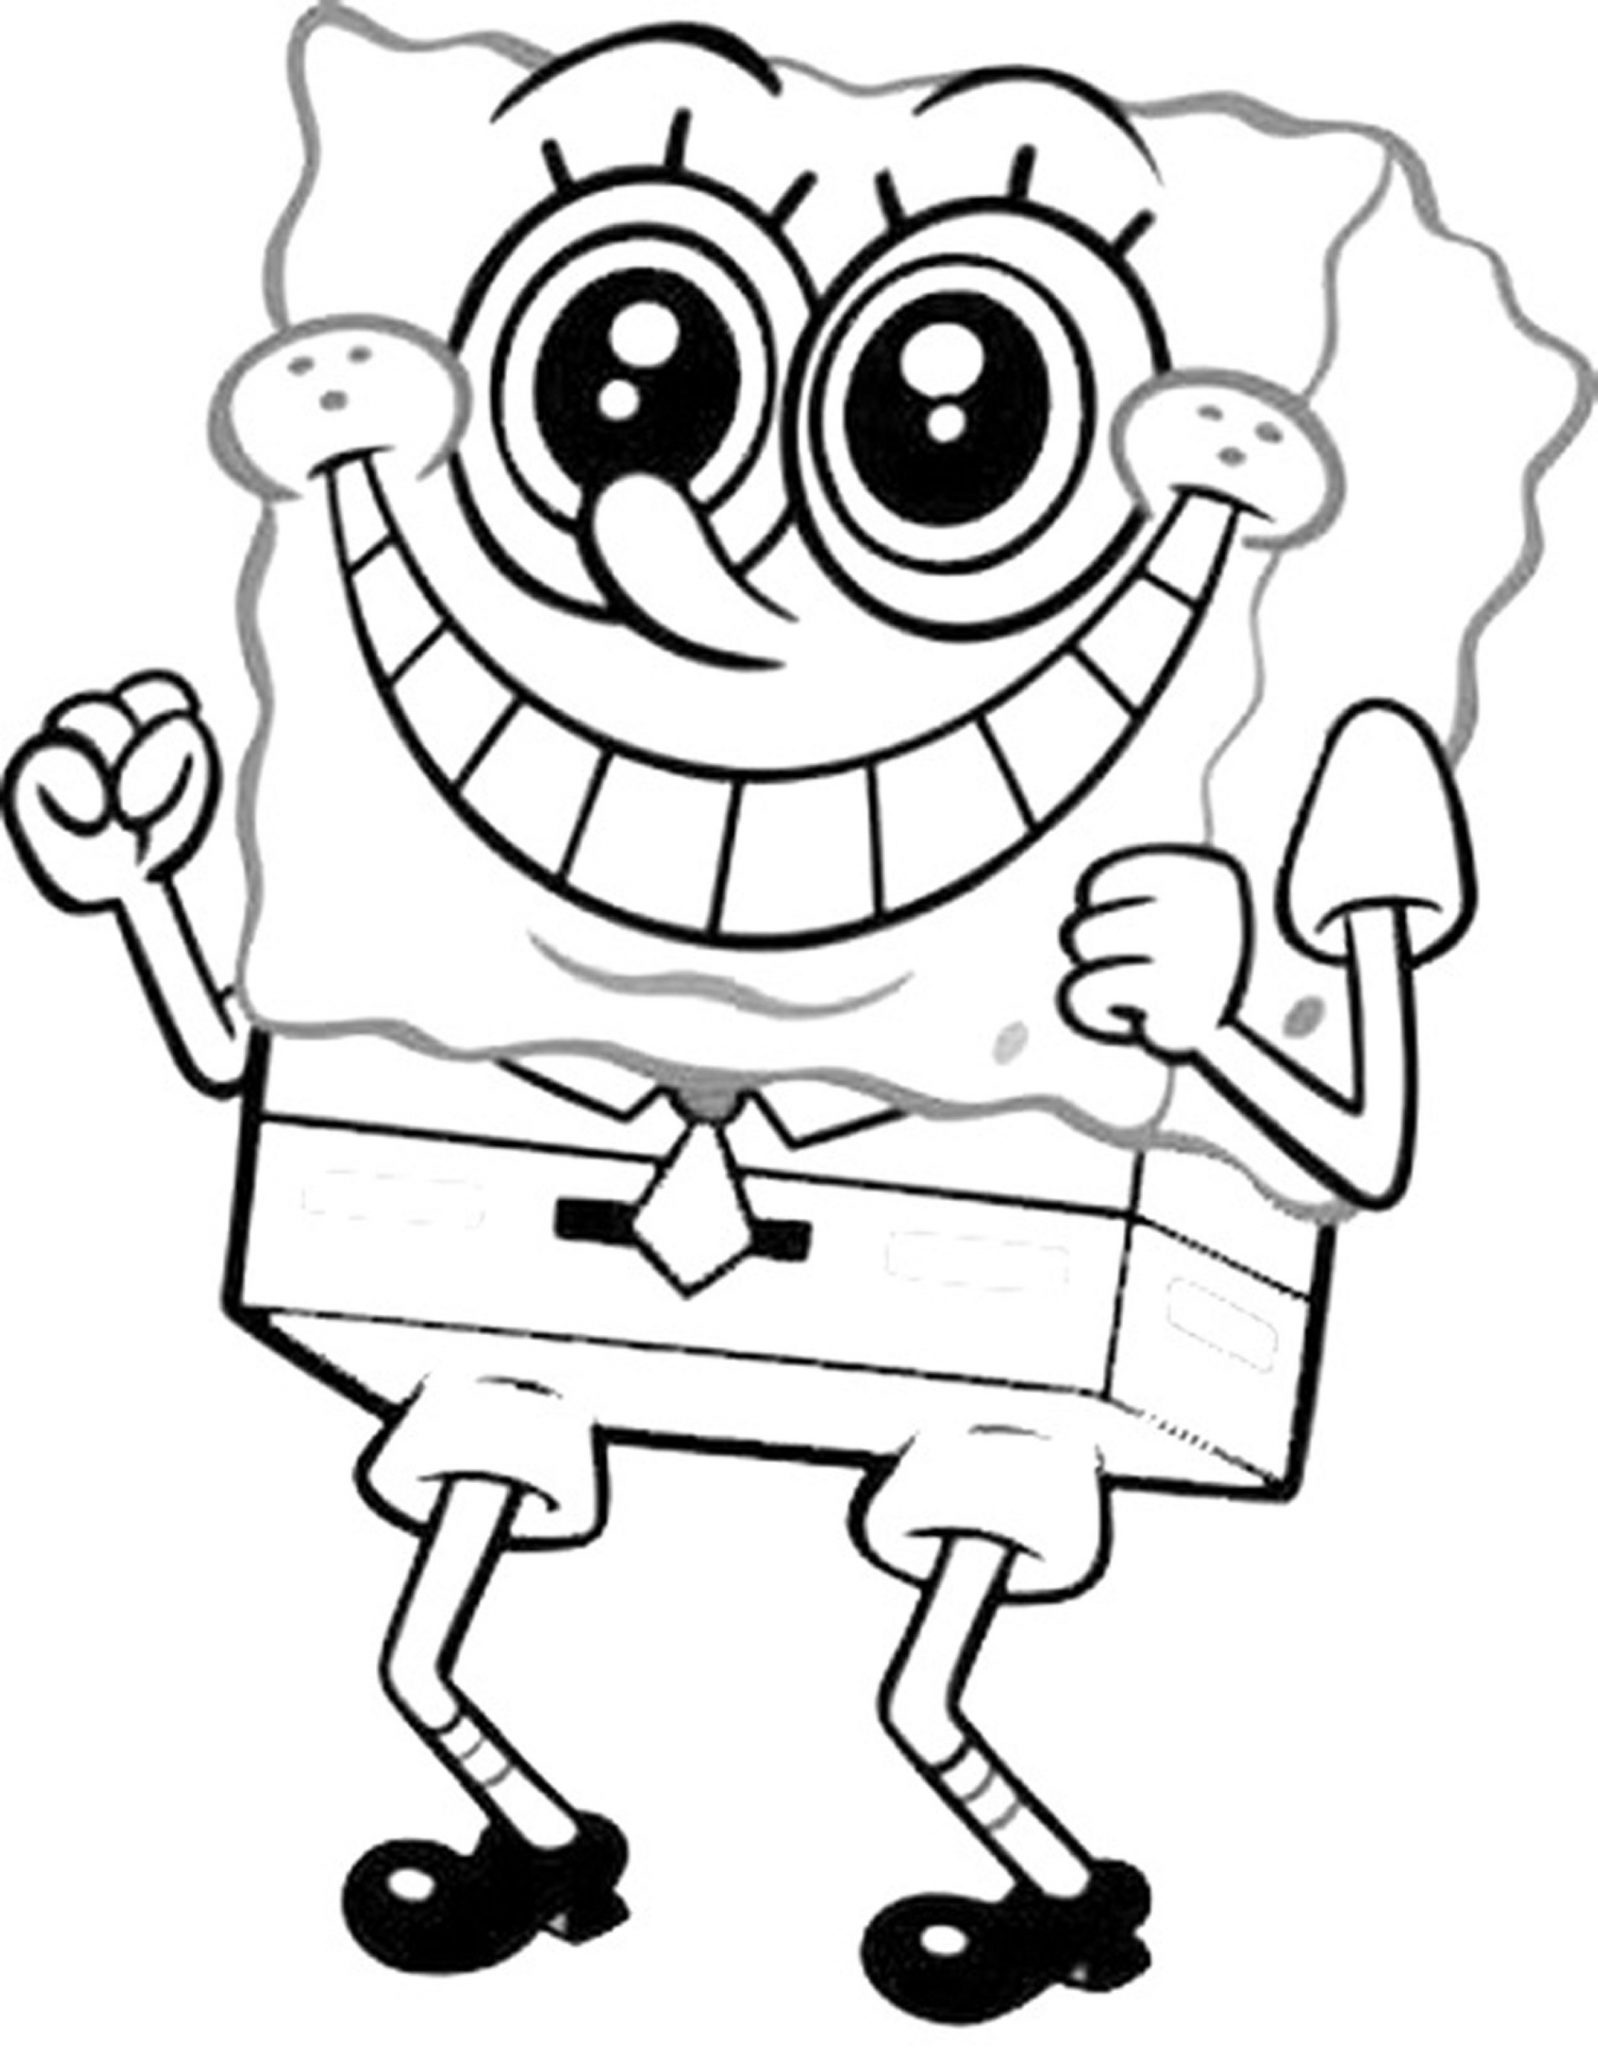 Print & Download - Choosing SpongeBob Coloring Pages For Your Children